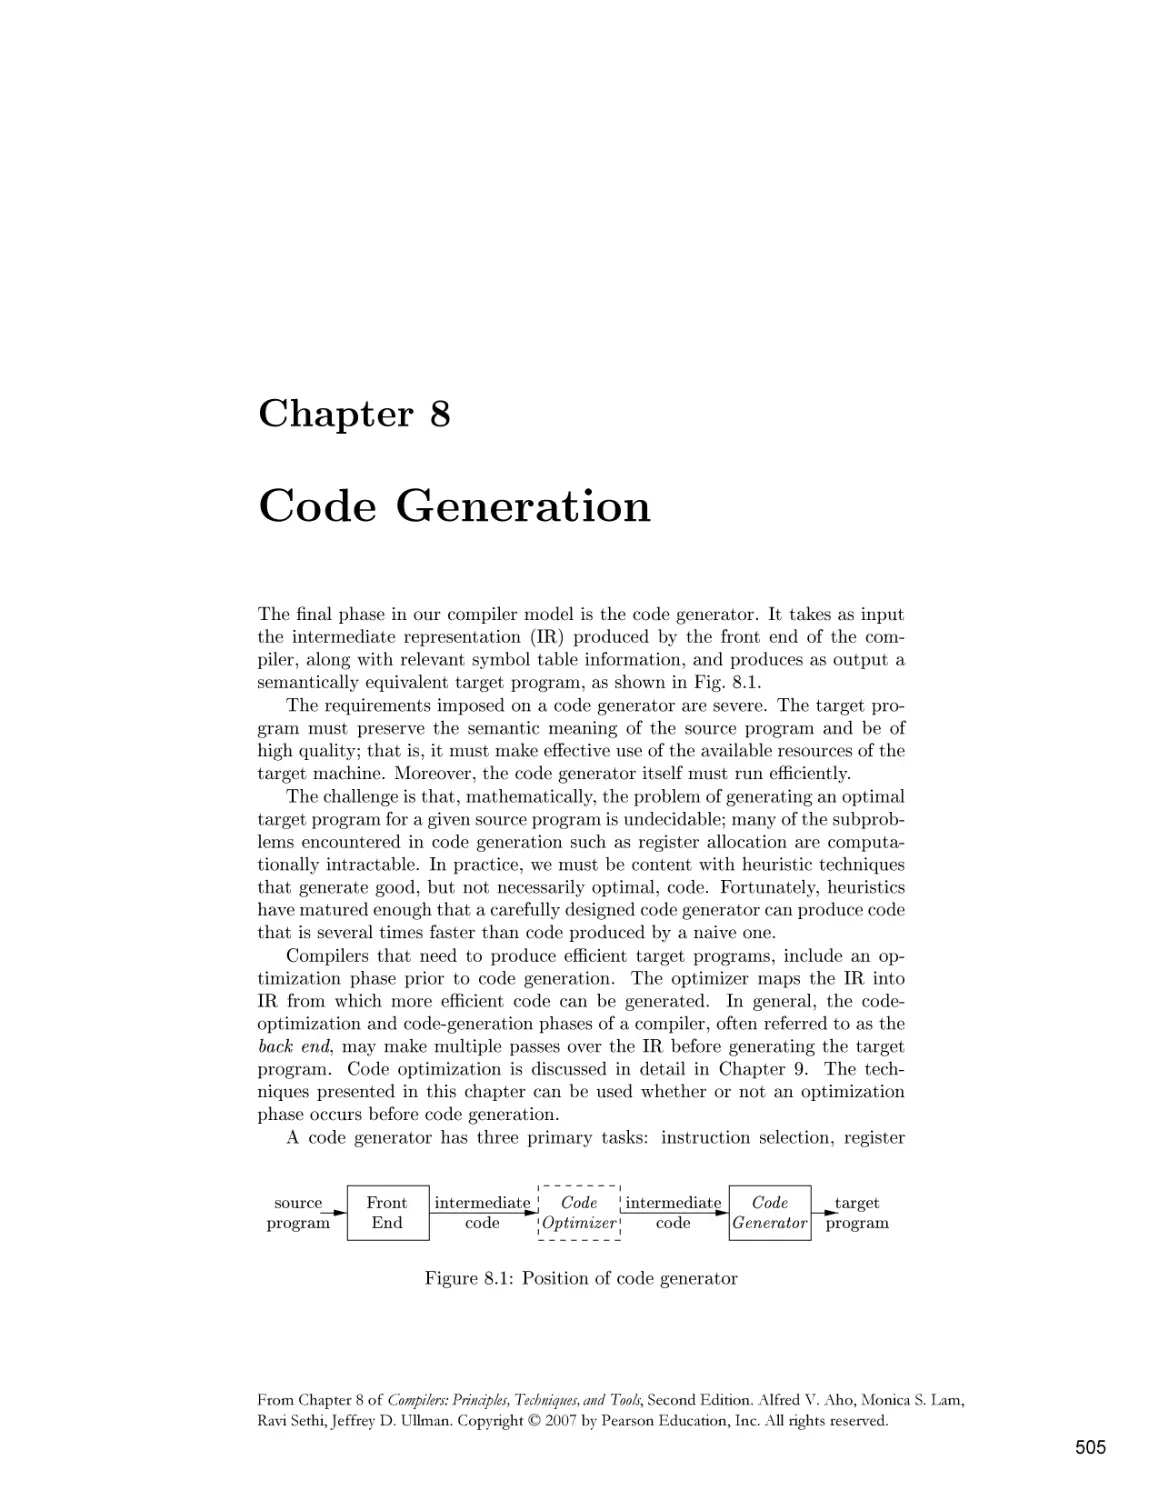 Chapter 8. Code Generation